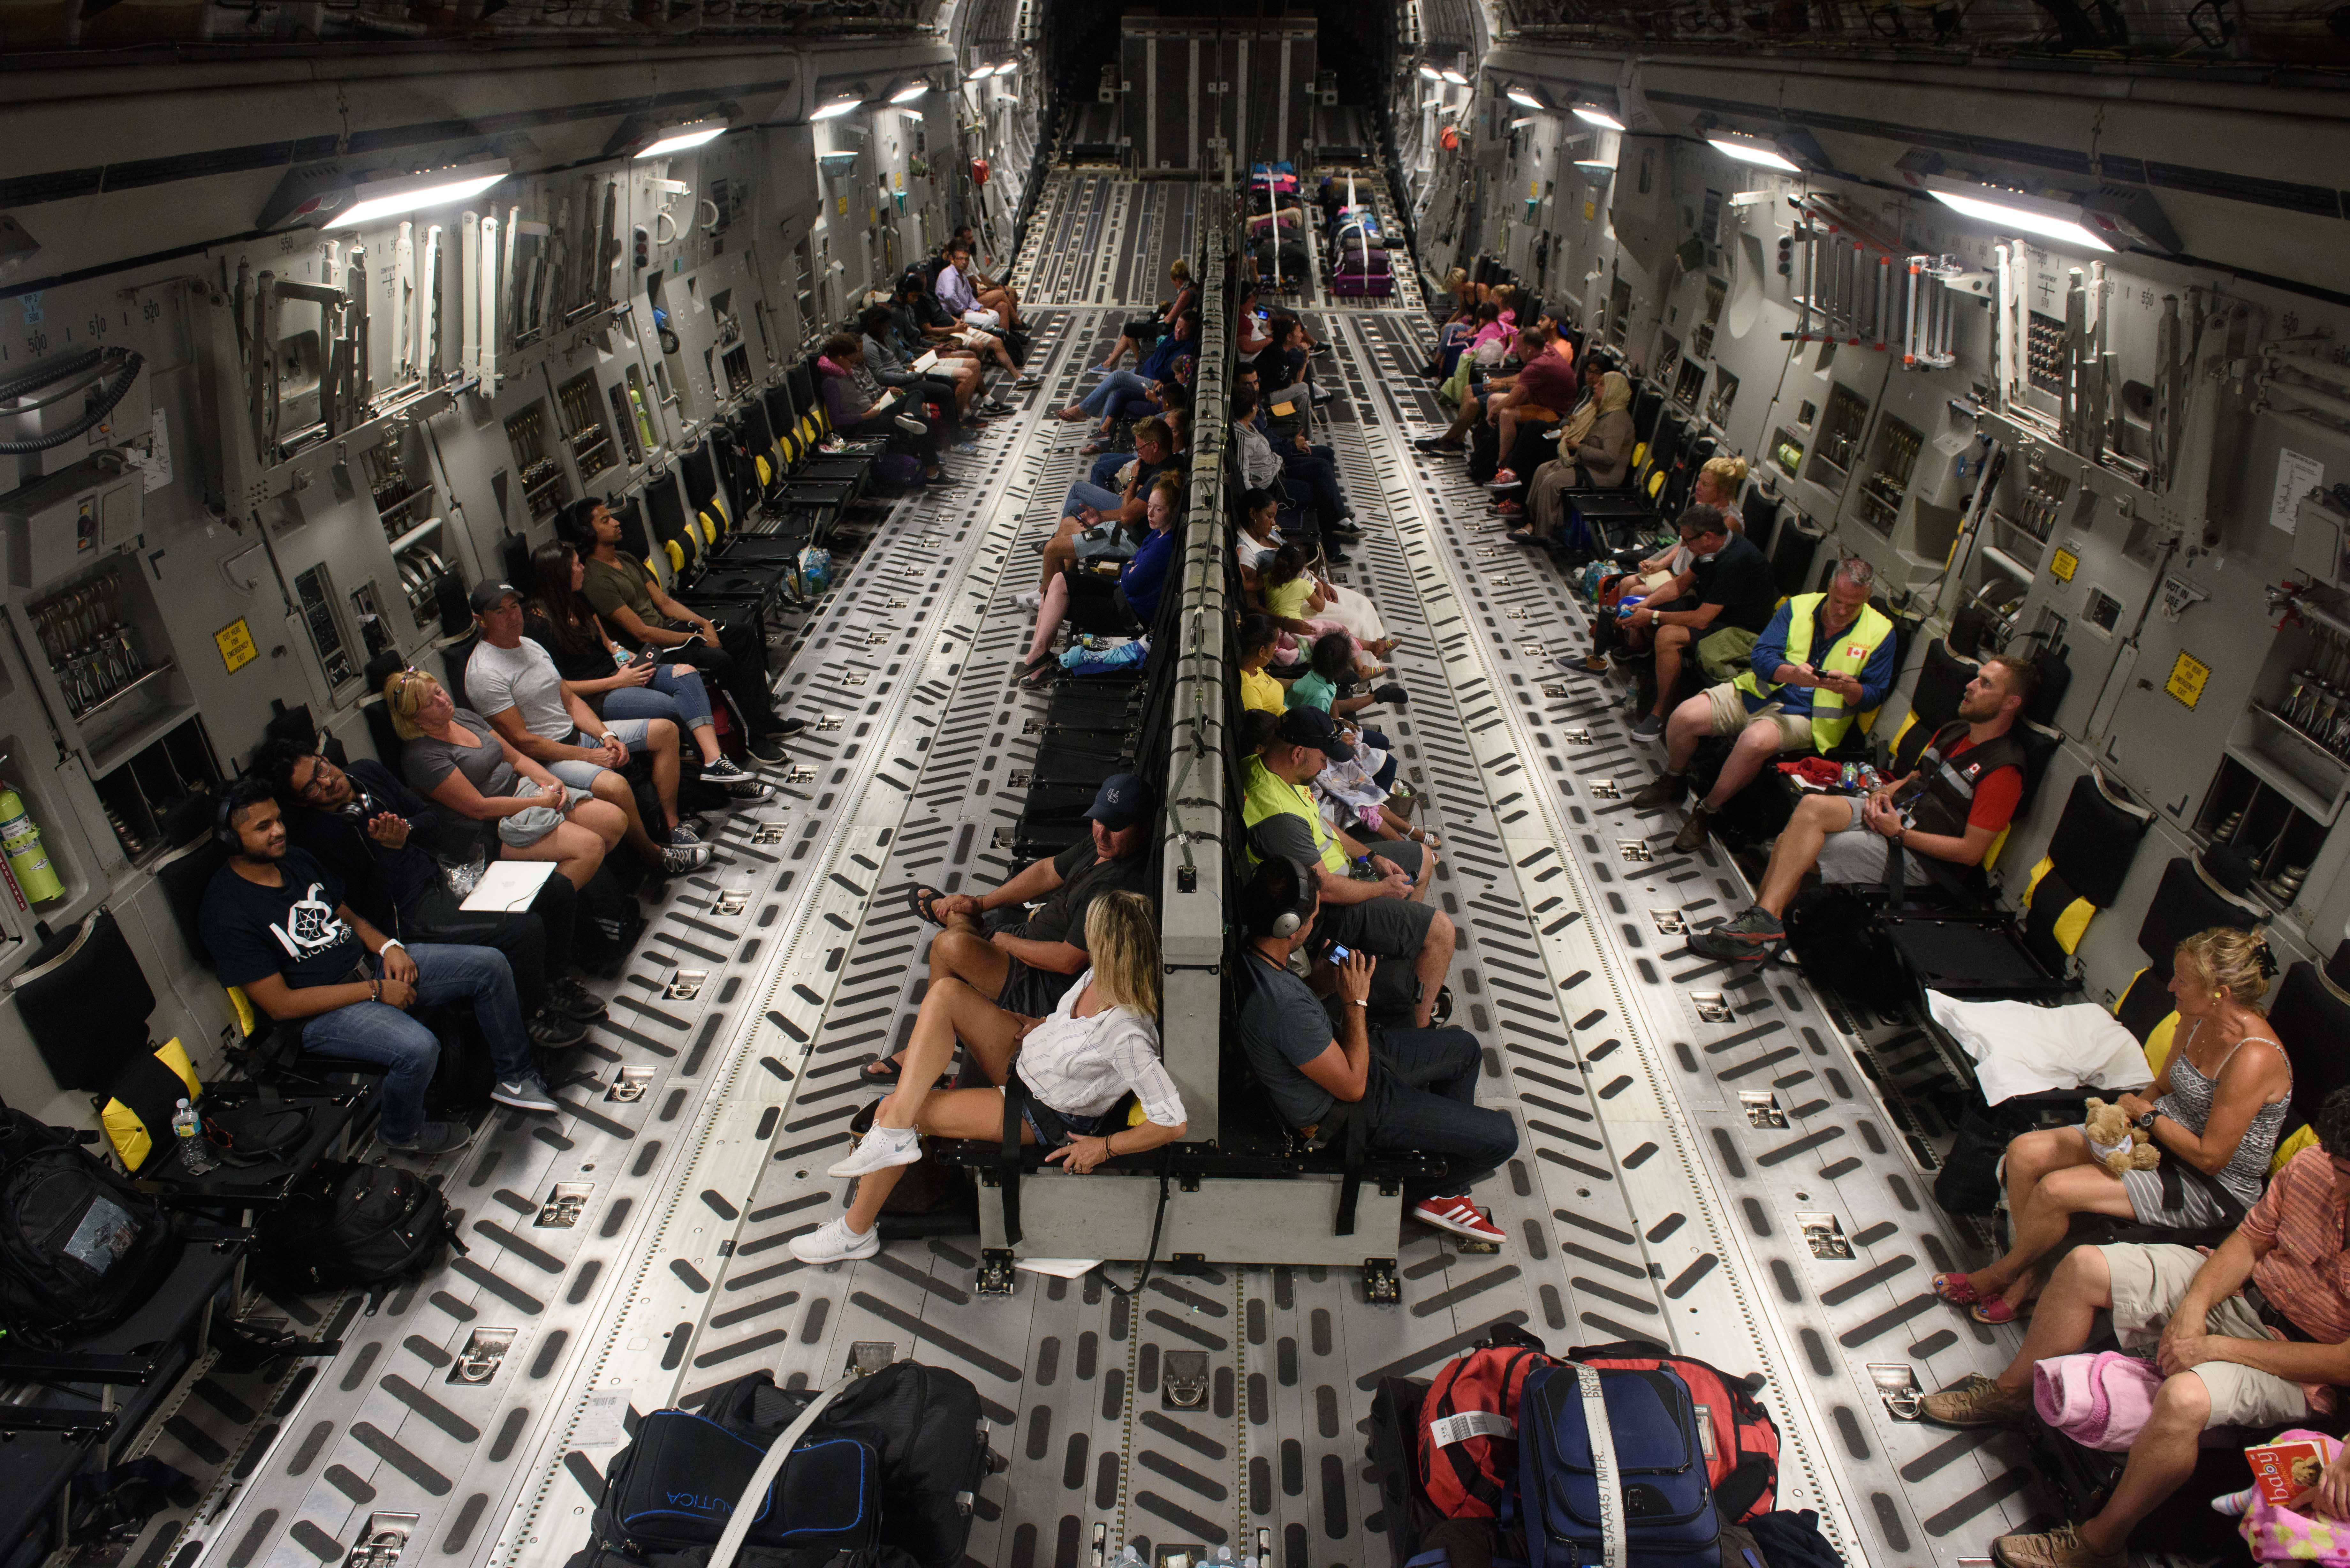 Fifty Canadian citizens stranded in the Caribbean following Hurricane Irma await departure inside a Canadian Air Force CC-177 Globemaster departing from the Provindeciales airport in the Turks and Caicos as part of Operation RENAISSANCE, September 14, 2017. Photo: MCpl Louis Brunet, Canadian Air Force Public Affairs